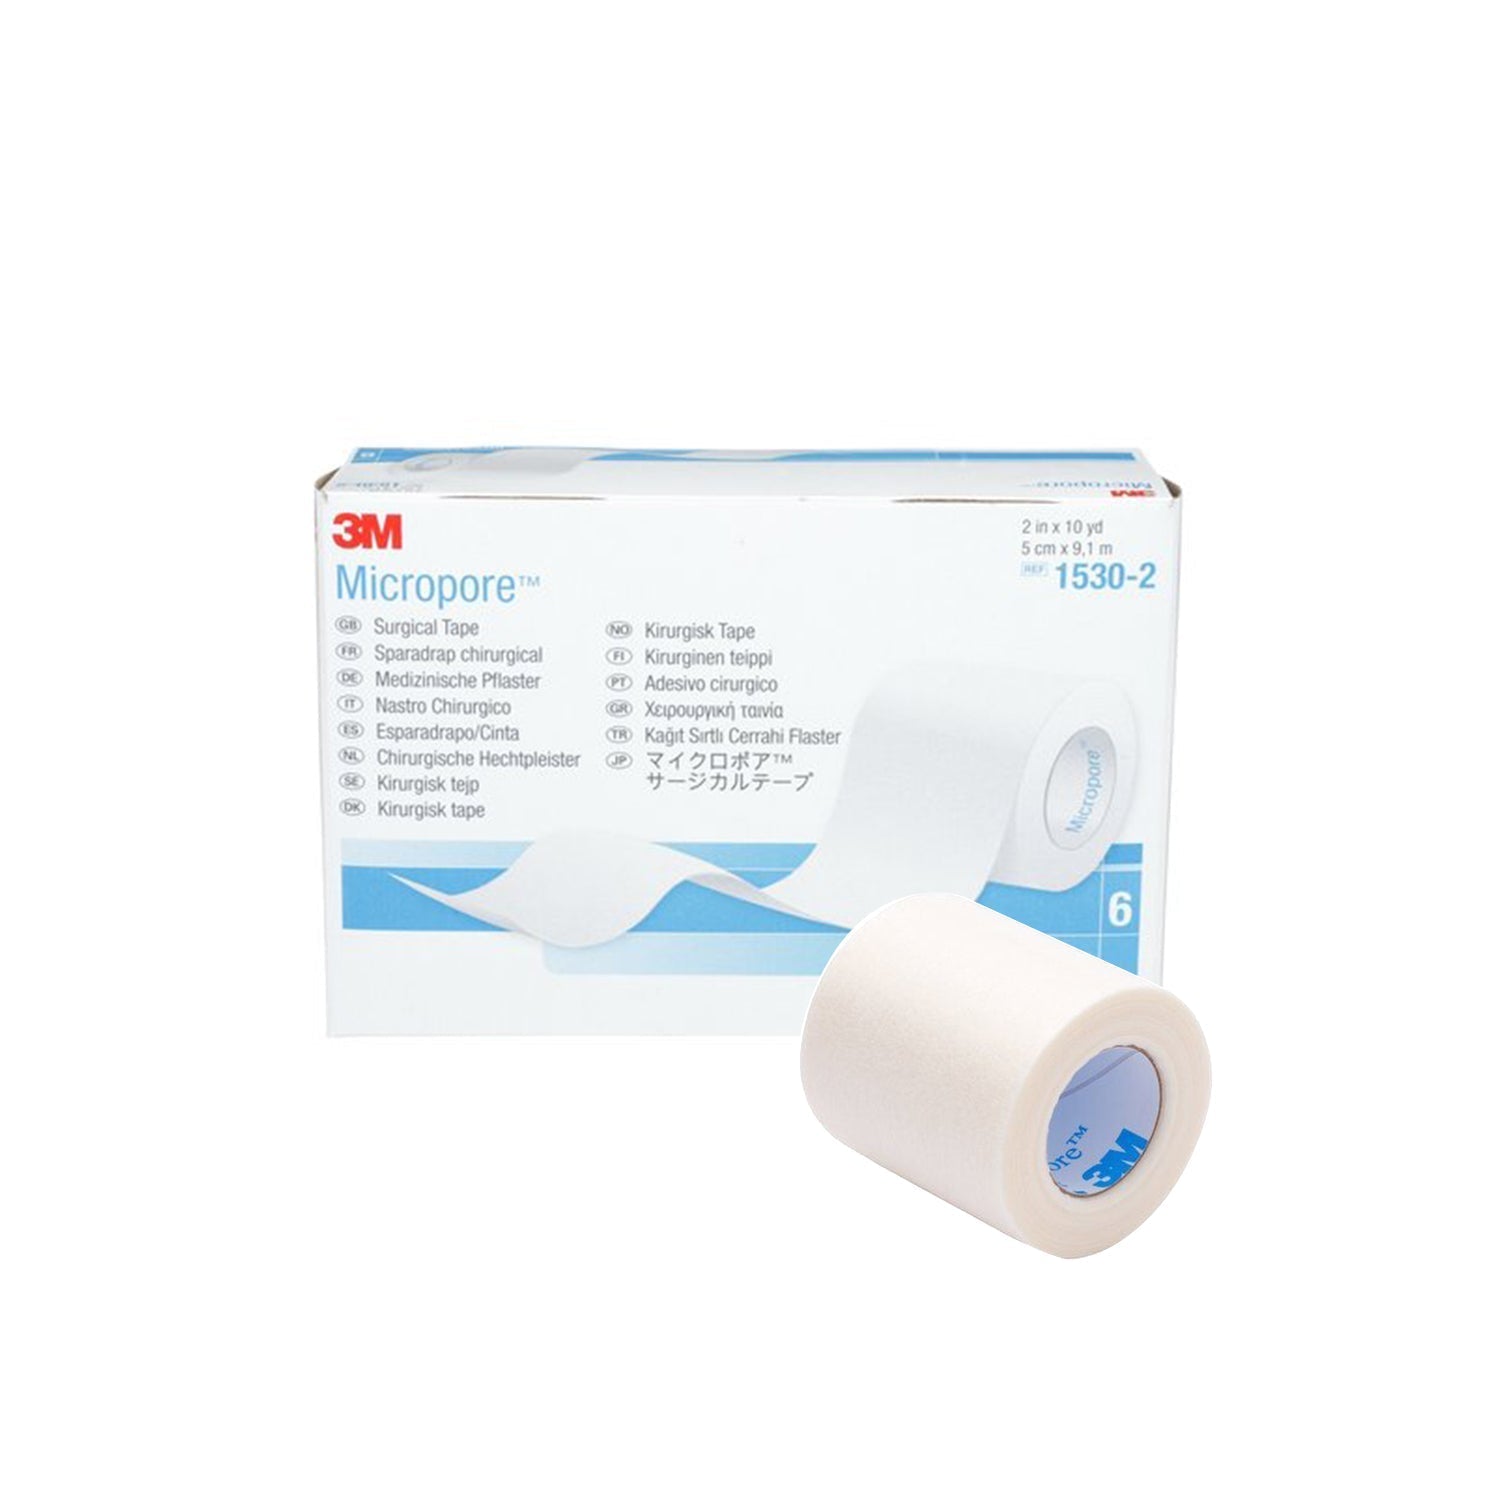 3M 3M Micropore Surgical Paper Tape - BX/6 Healthcare Box of 6 